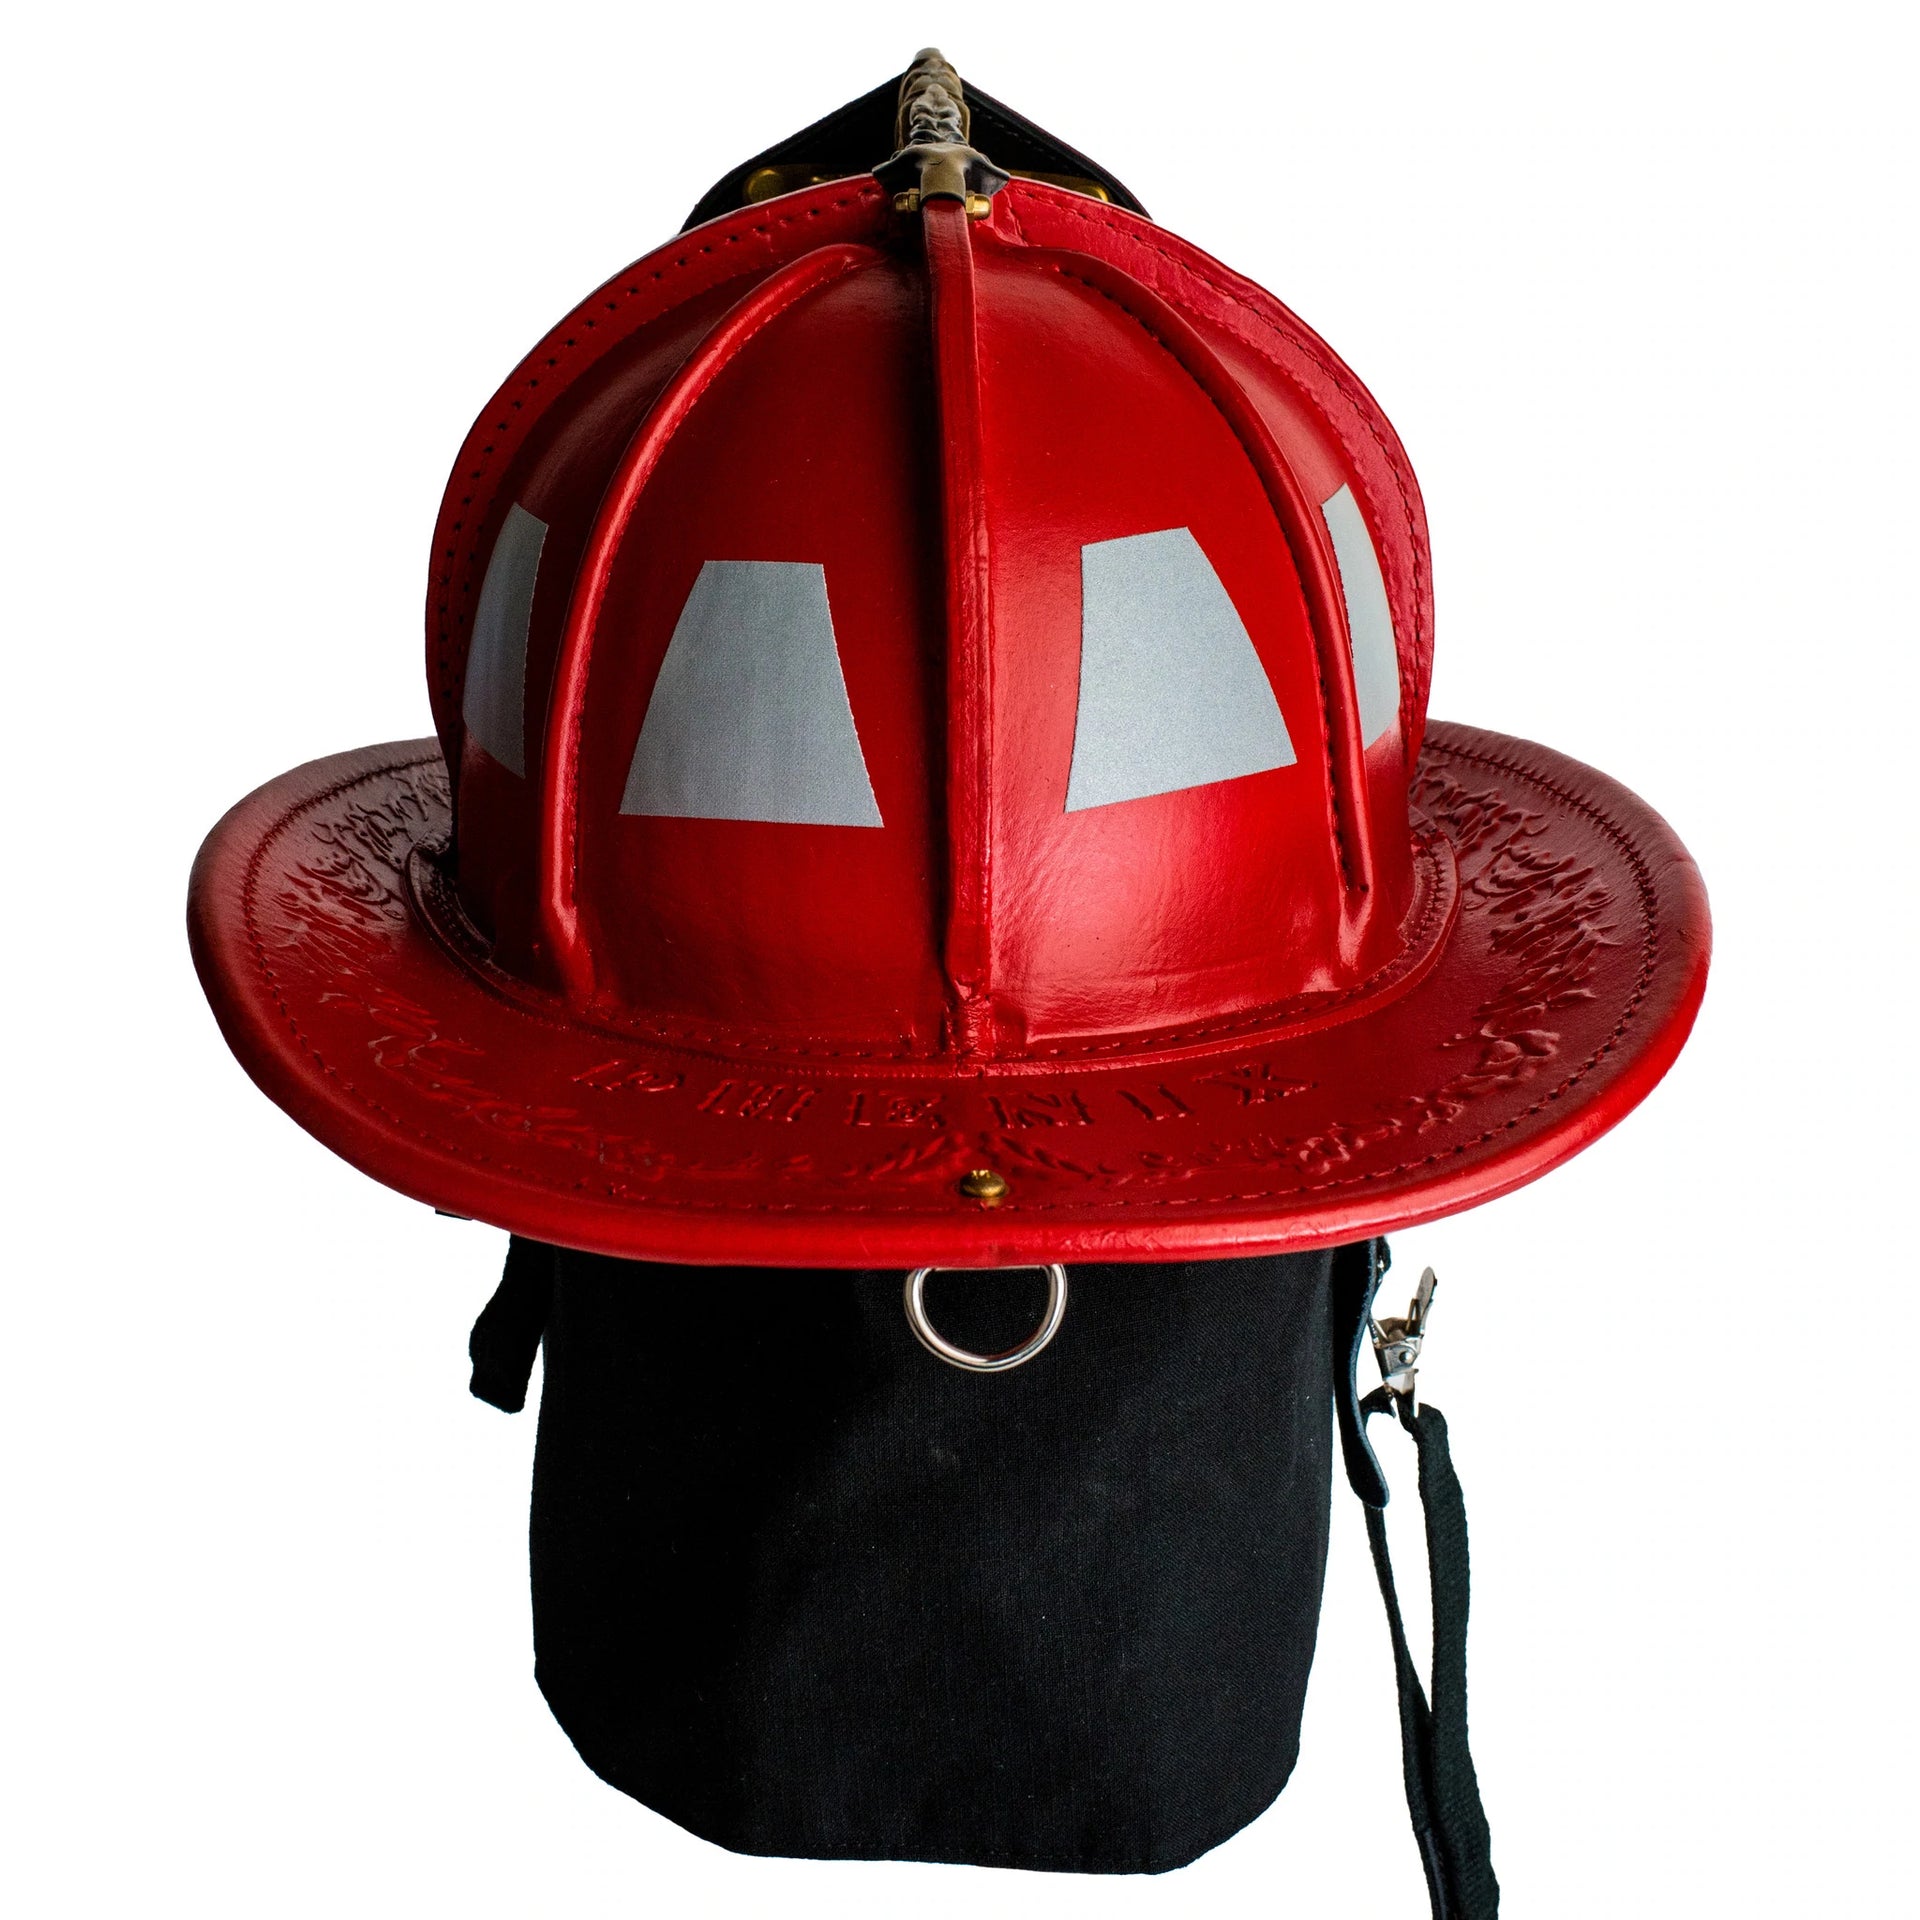 Phenix Technology TL2 Traditional Leather Fire Helmet | The Fire Center | Fuego Fire Center | FIREFIGHTER GEAR | The TL-2 Traditional Leather fire helmet is the lightest NFPA complaint authentic leather helmet on the market. Worn by firefighters worldwide, the TL-2 combines tradition and modern safety in a handcrafted masterpiece.  Compliant to current OSHA and NFPA 1971 standards.  